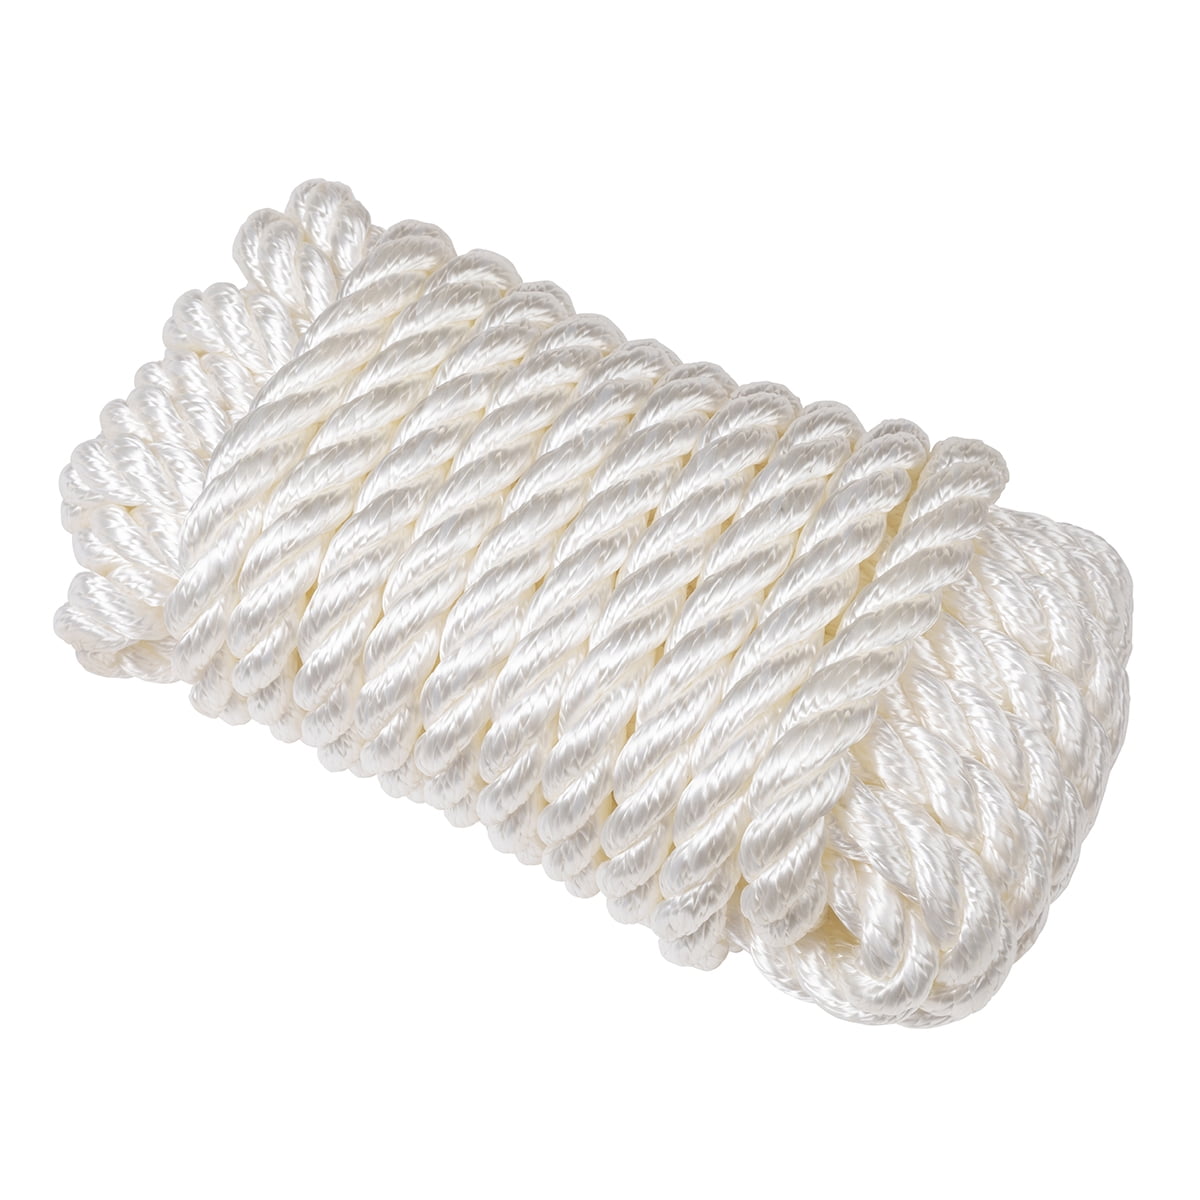 75' Feet of Marine Cordage,Yellow Poly Dock Line,1/4" Inch Twisted Boat Rope,New